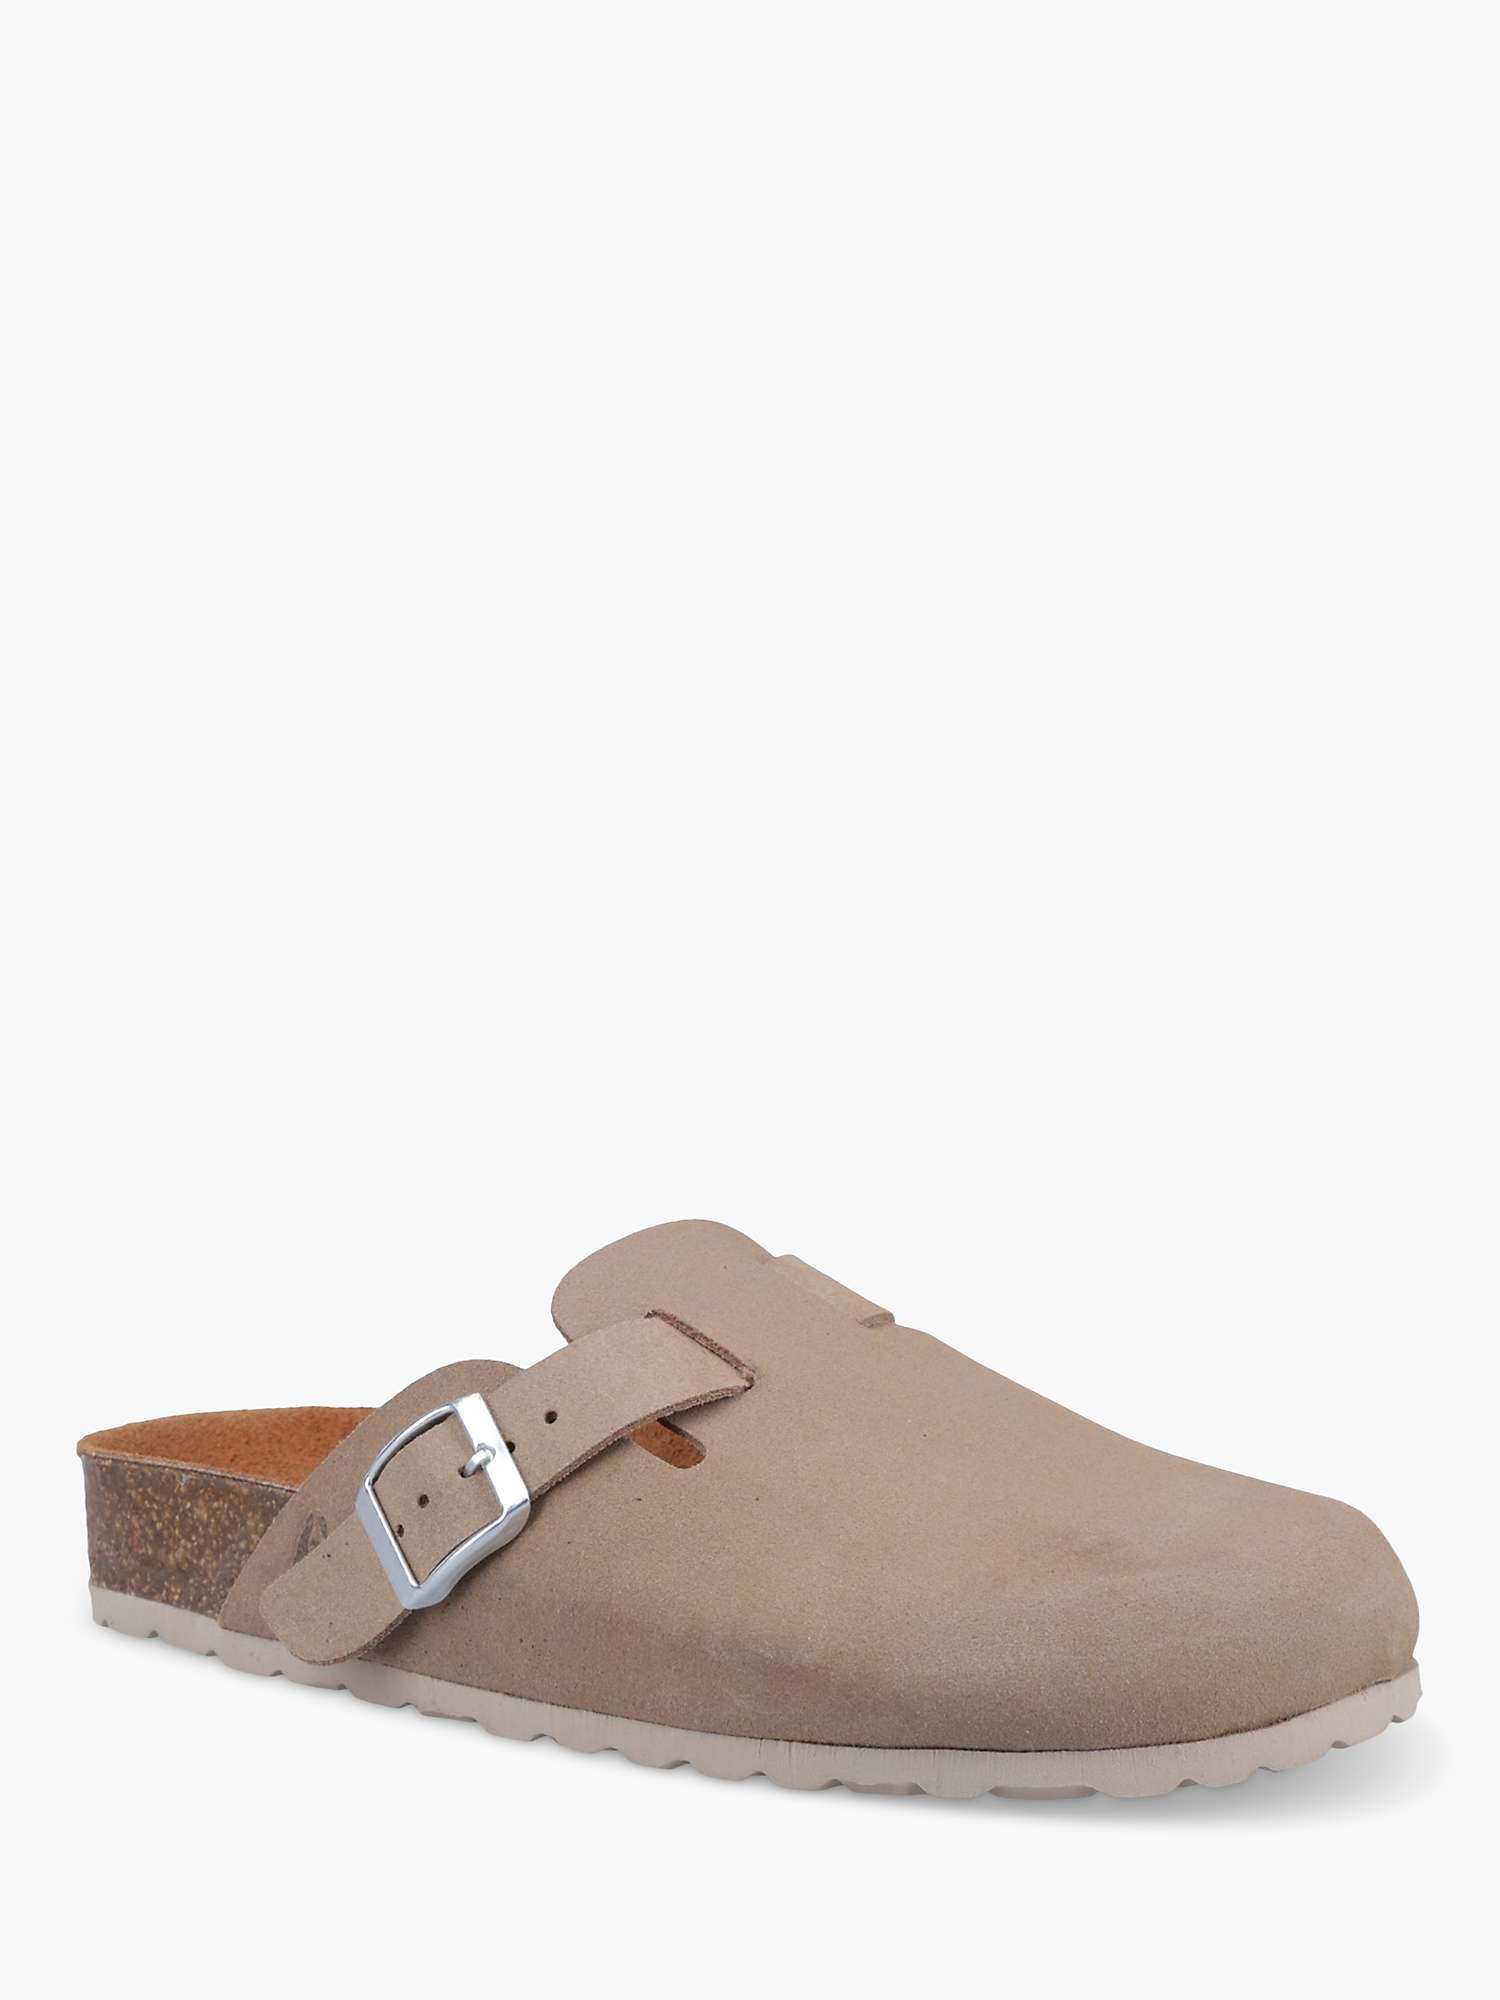 Buy Hush Puppies Bailey Suede Mule Clogs Online at johnlewis.com